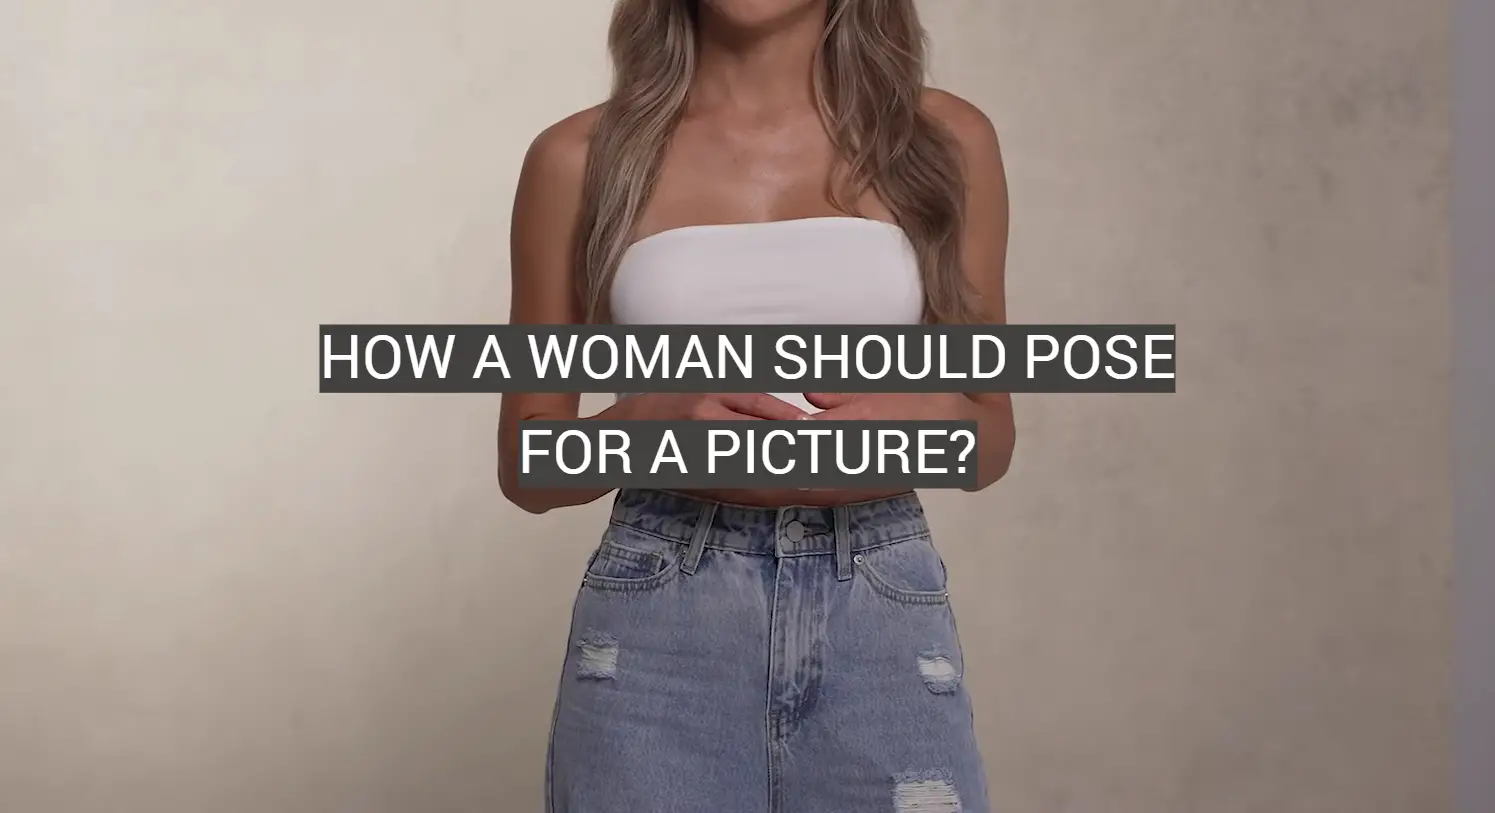 How a Woman Should Pose for a Picture?